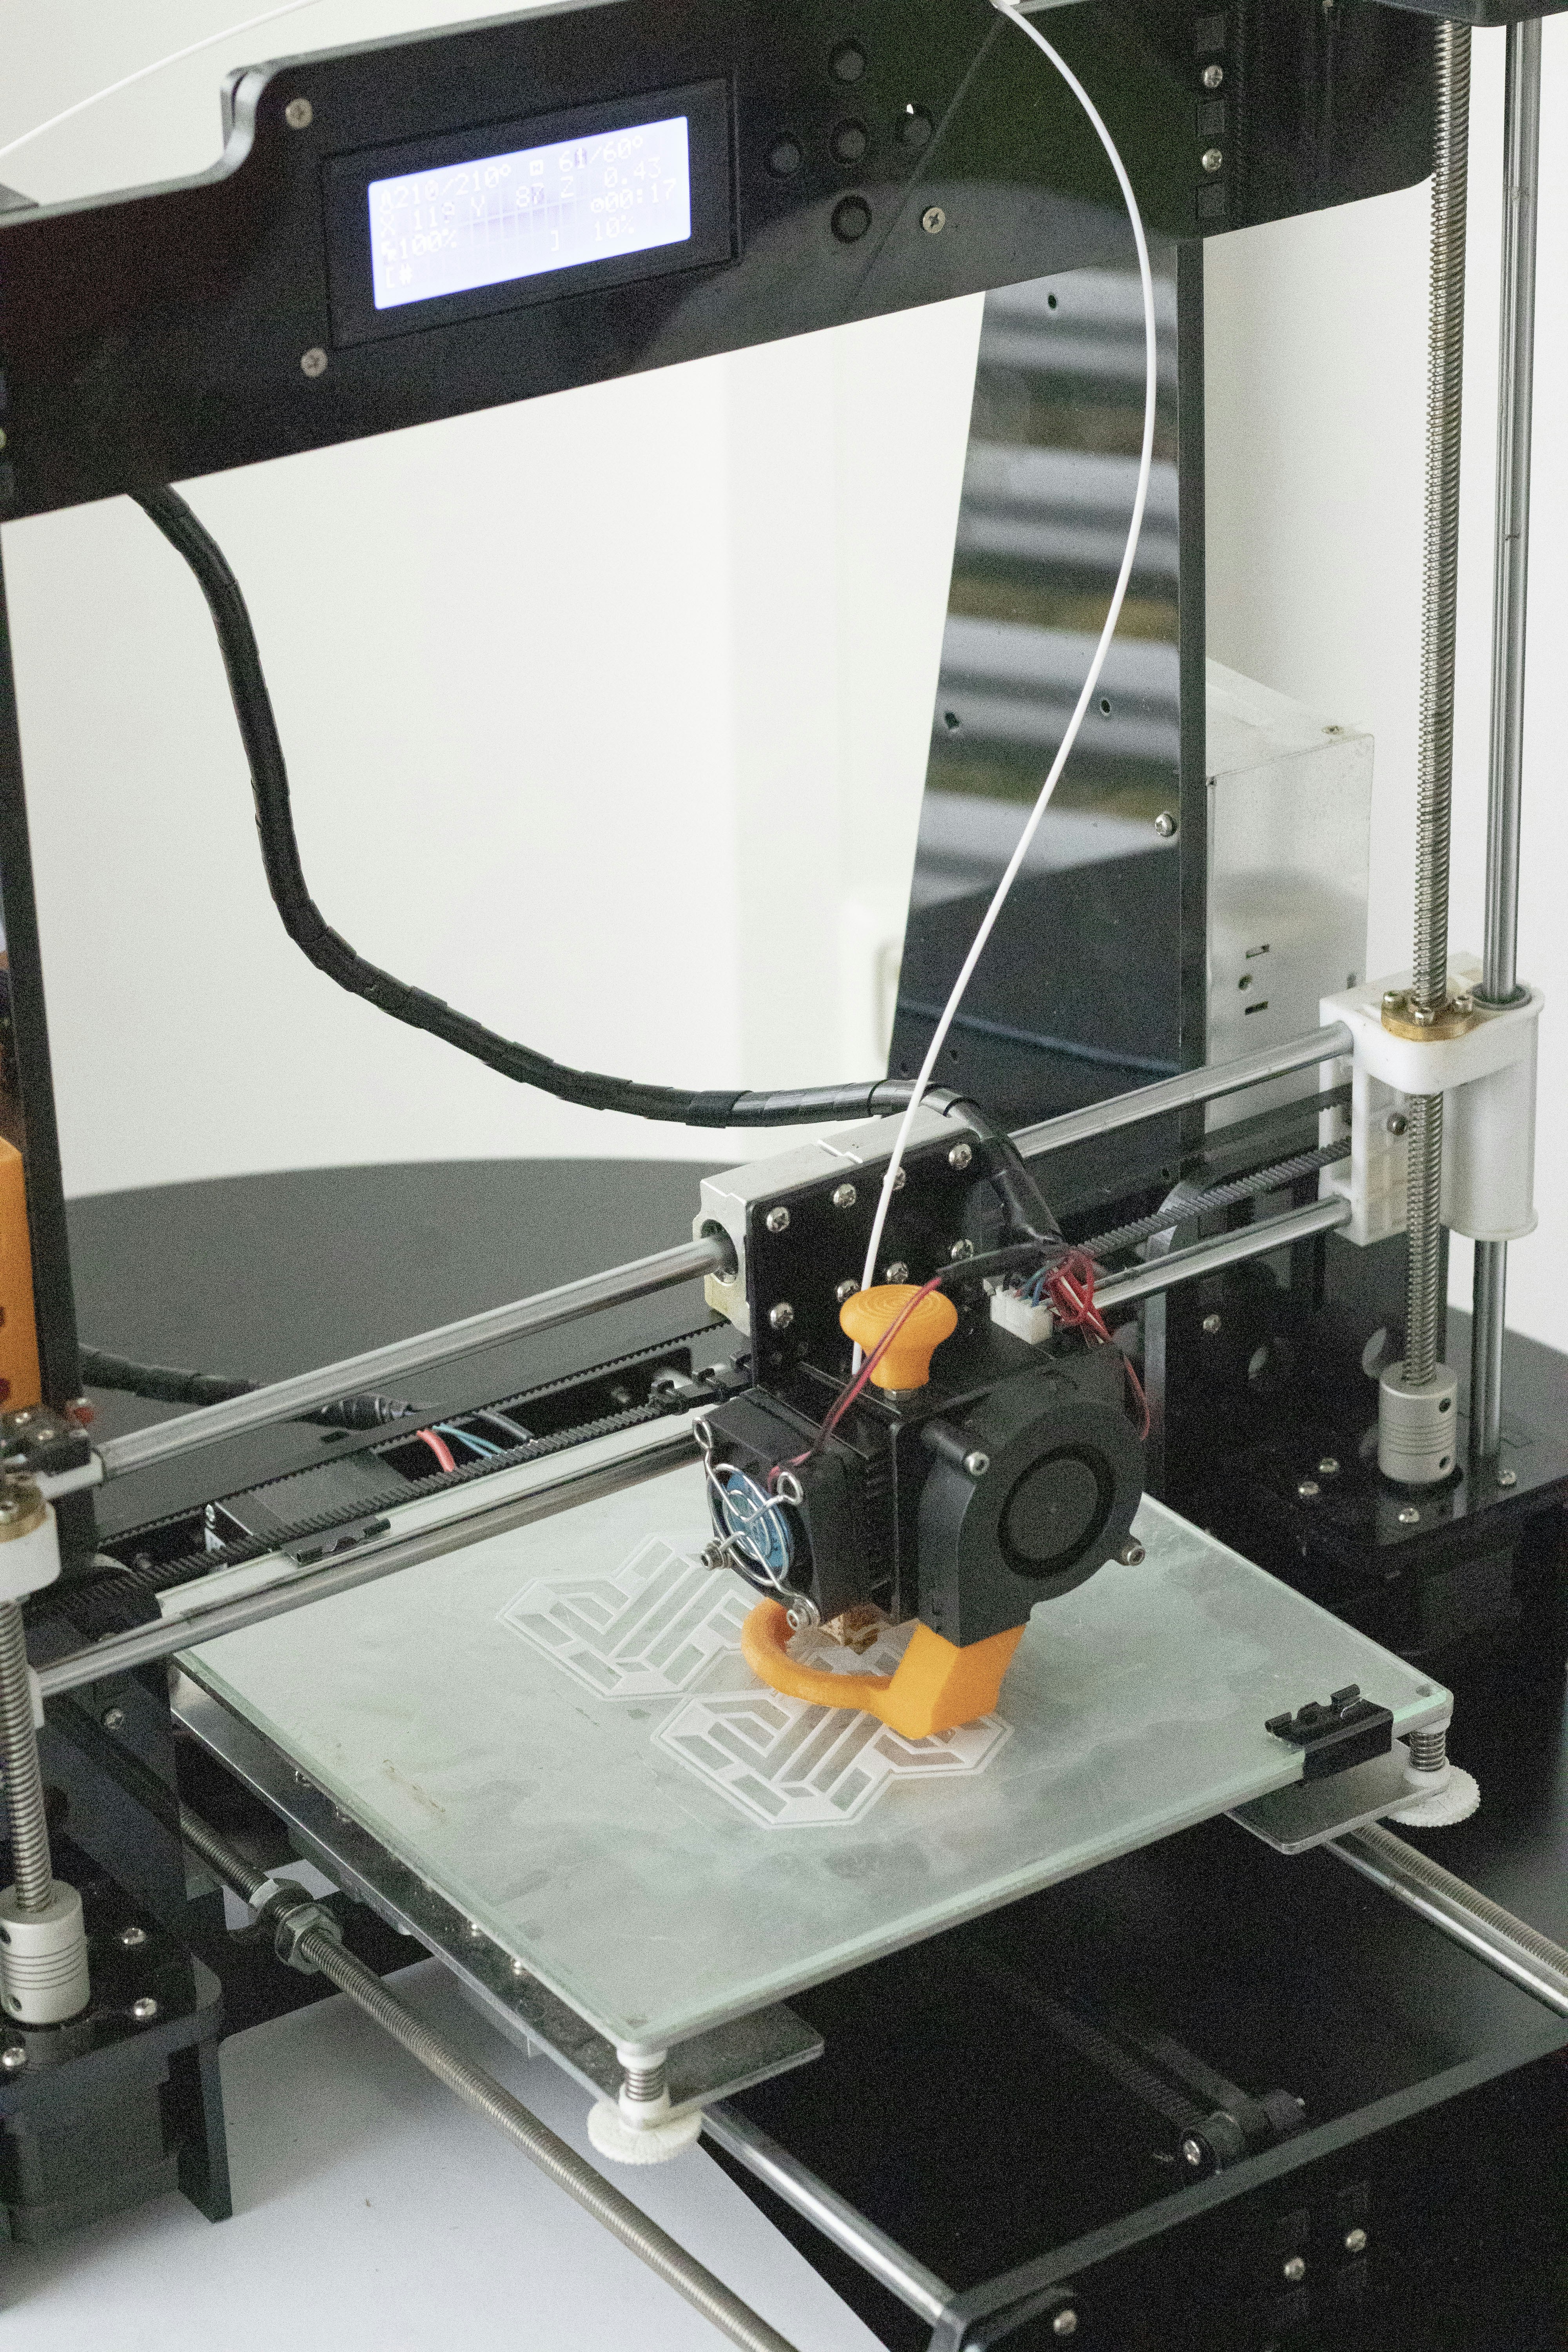 3D Printing Helps With Supply Chain Woes